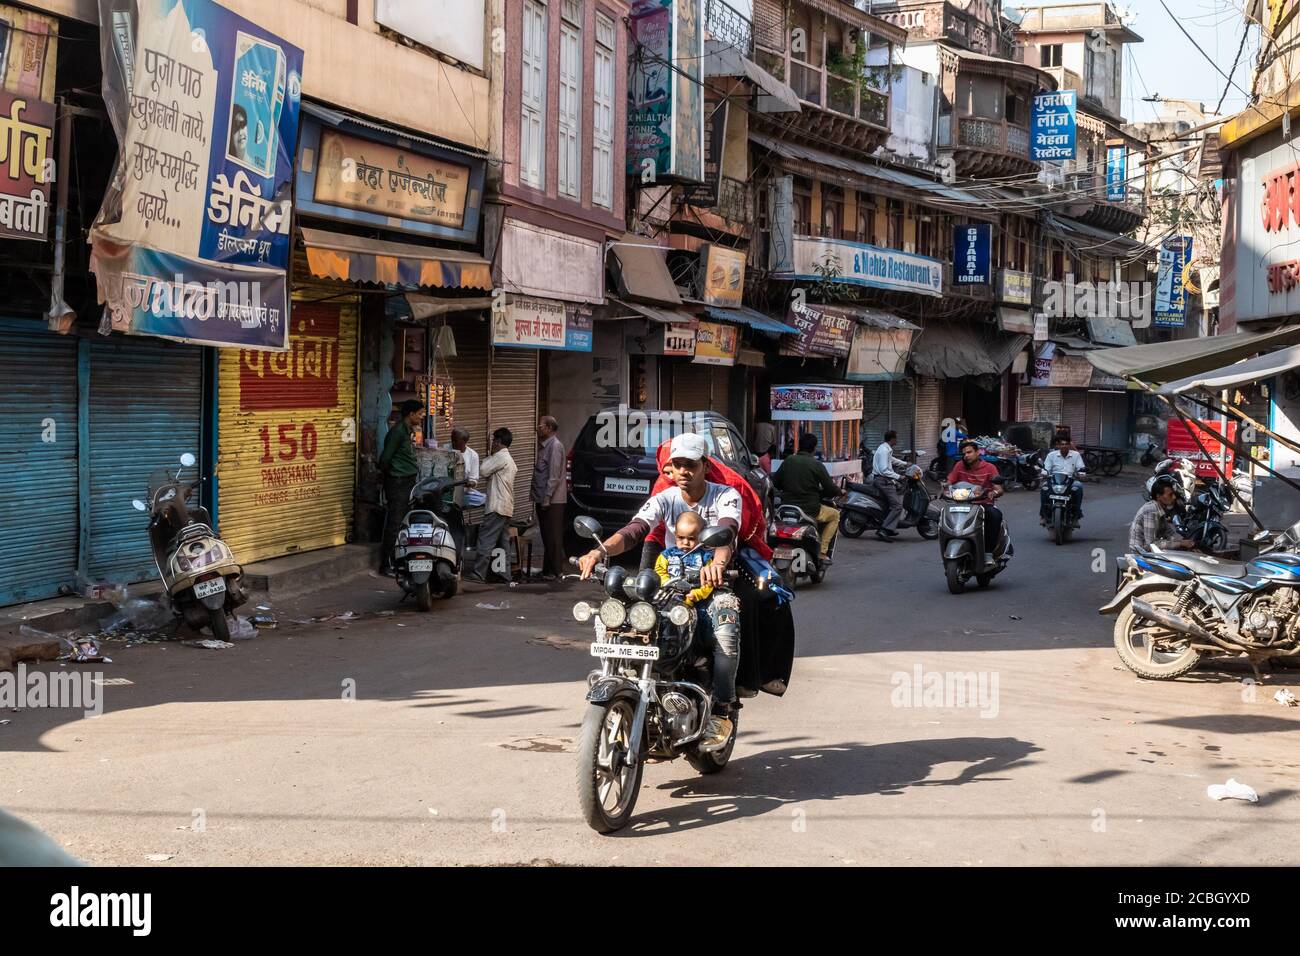 Bhopal, Madhya Pradesh,India - March 2019: An Indian man rides a motorcycle with his family in a busy market street in the old city area of Bhopal. Stock Photo